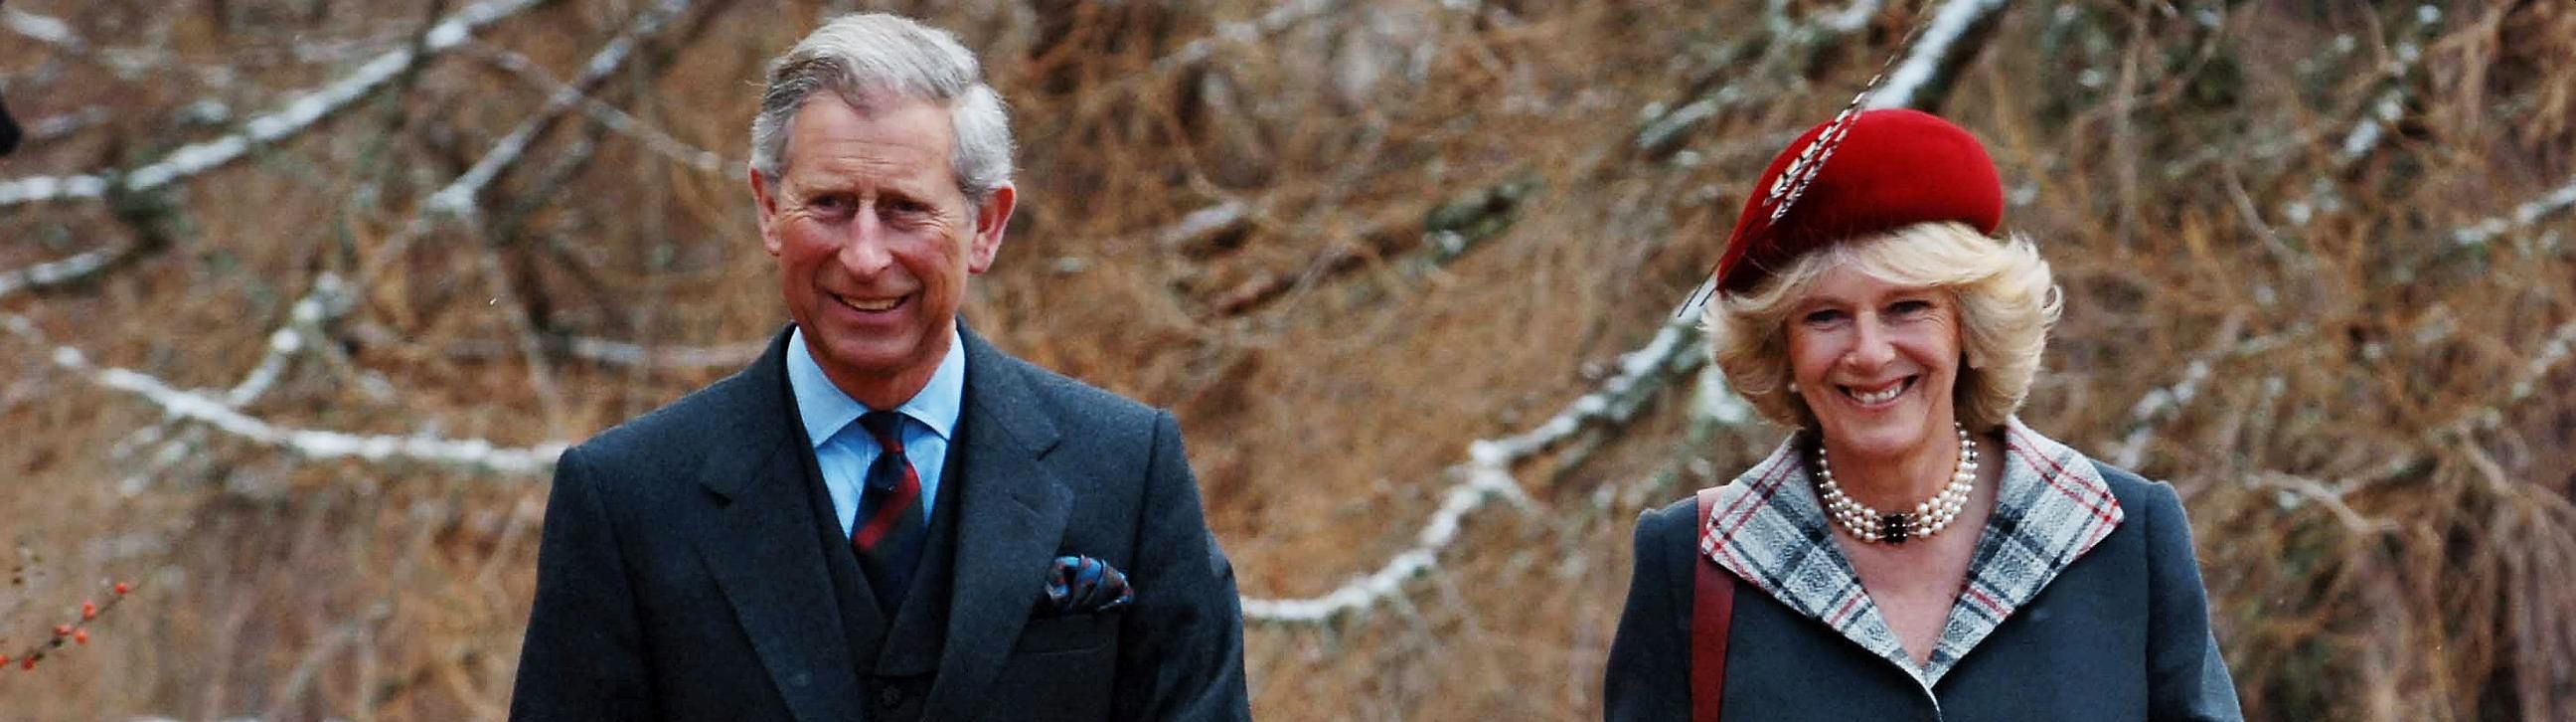 Prince Charles and Lady Camilla in plaid